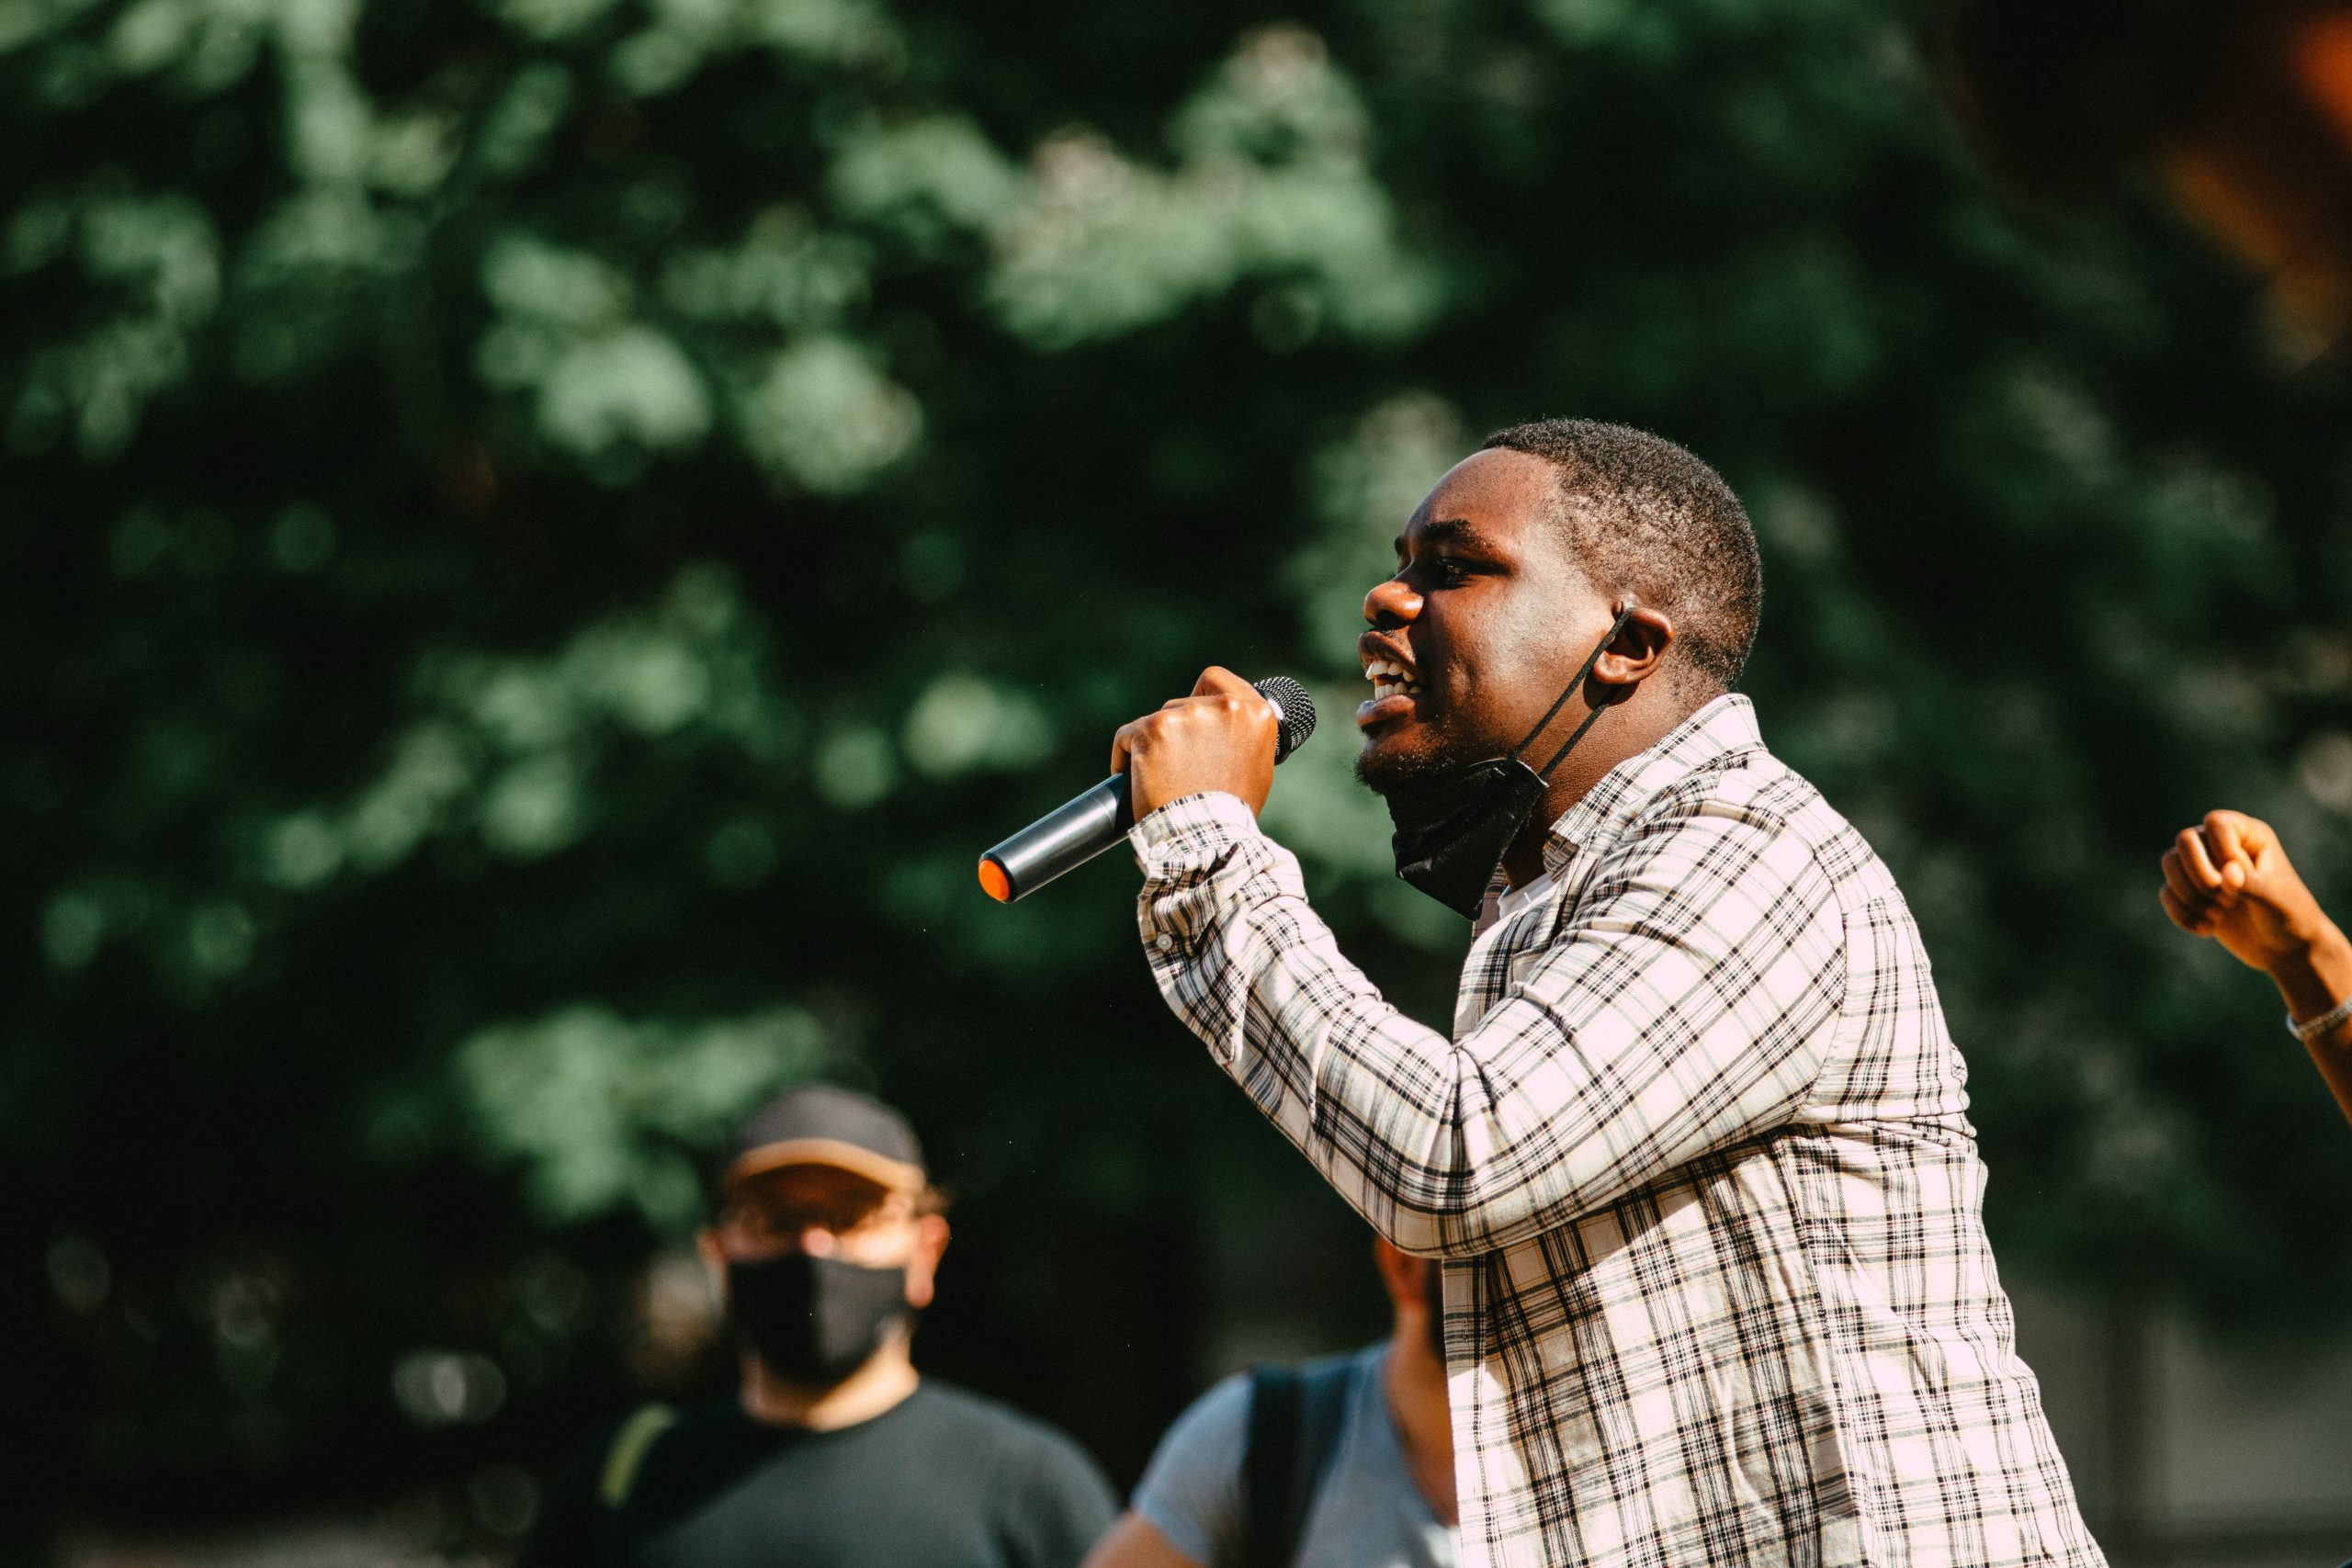 A young black man with a microphone passionately addresses an outdoor audience not in the picture